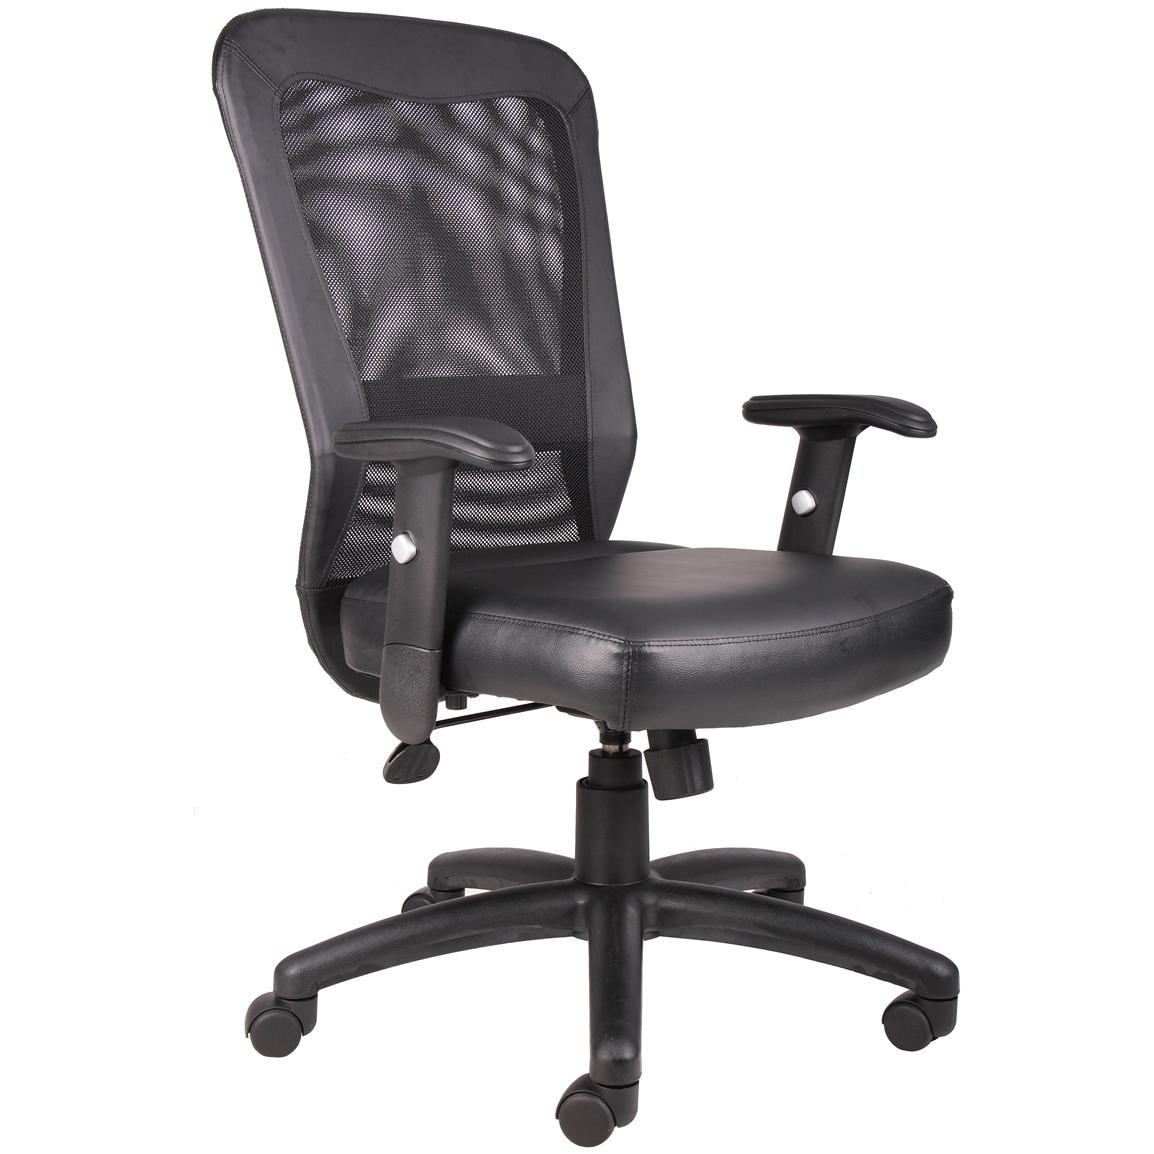 Boss Mesh Executive Chair - 134995, Office at Sportsman's ...